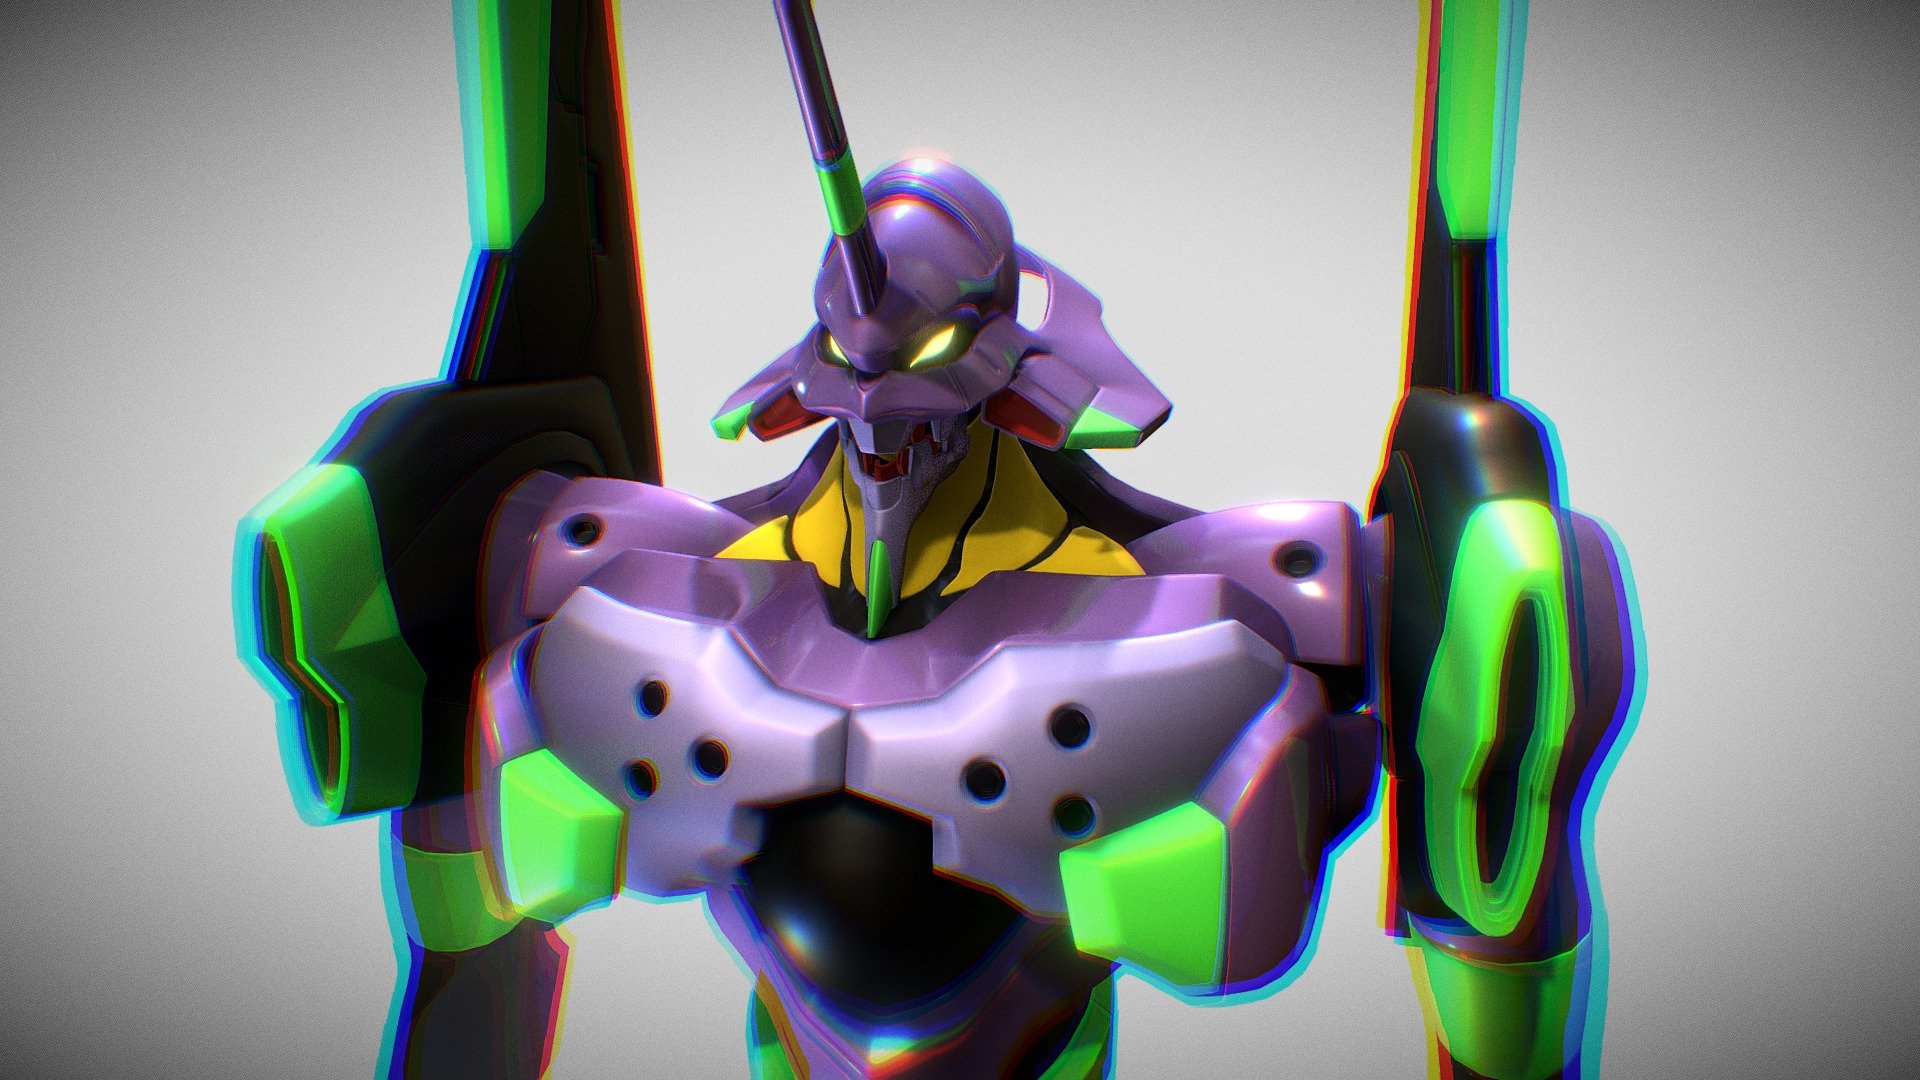 At the beginning of EVA evangelion EVA YiHaoJi machine 【Bound】
= = = = = = = = = = = = = = = = = = = = = = = = = = = = = = = = = = = = = = = = = = = = = = = = 
Hair before a only the version of the model, on the spur of the moment to improve it recently, this is the finished version, head and arms model have modified slightly, the material has been good, and do the binding, brush weights are in place, you can transfer the drawing. Render file contains three layers, namely, a few pieces of rendering environment, can again to POSE rendering&hellip;
= = = = = = = = = = = = = = = = = = = = = = = = = = = = = = = = = = = = = = = = = = = = = = = = 
Other works ~ welcome to visit my home page - EVA initial numbering machine【Bound】 - Buy Royalty Free 3D model by mpc199075 3d model